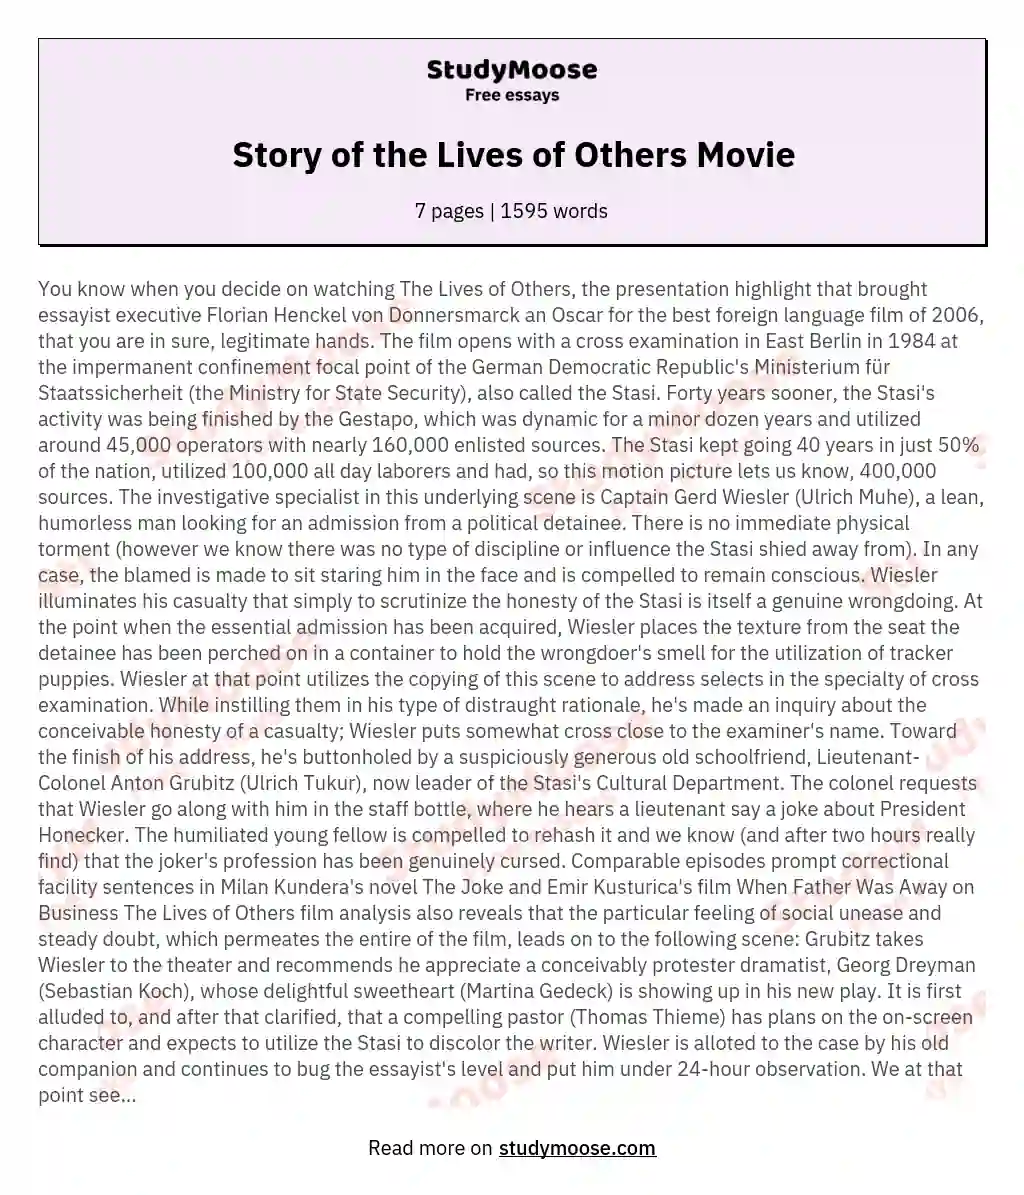 Story of the Lives of Others Movie essay